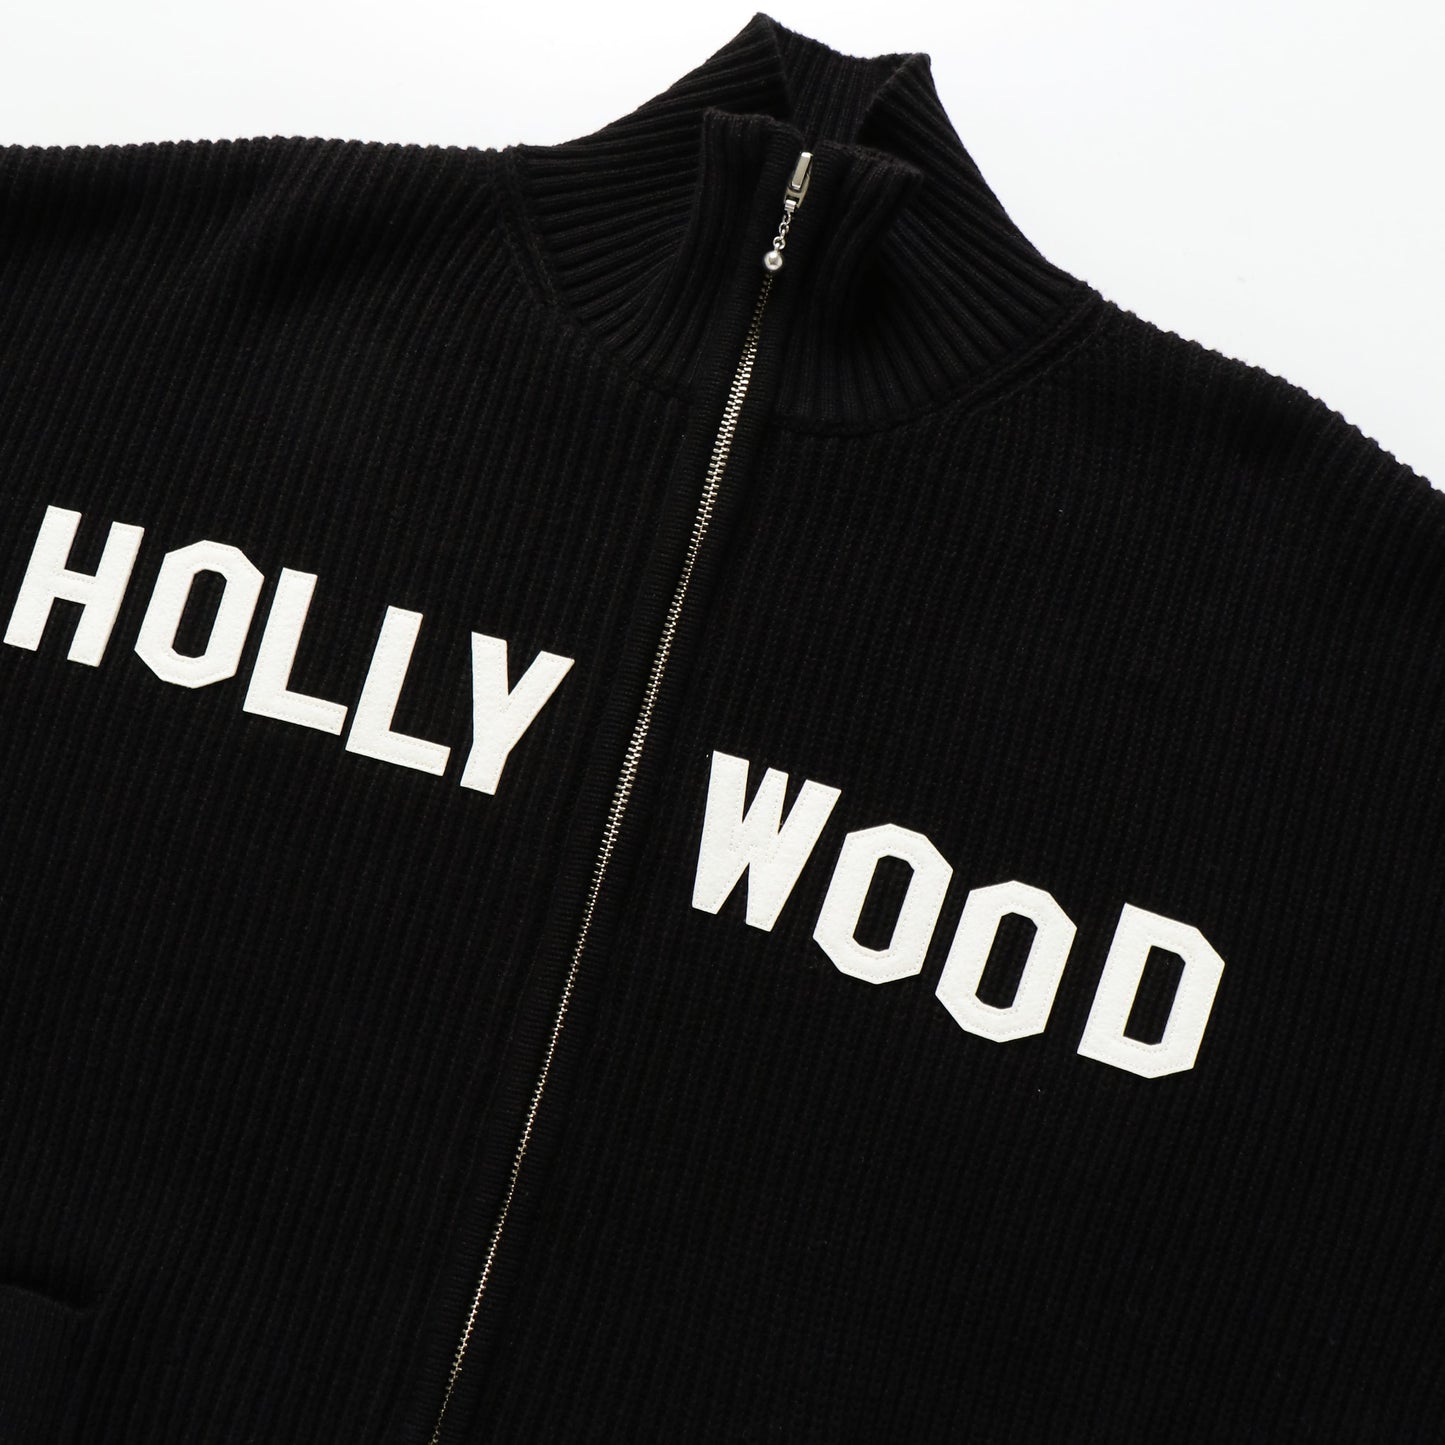 "HOLLYWOOD" Drivers Knit